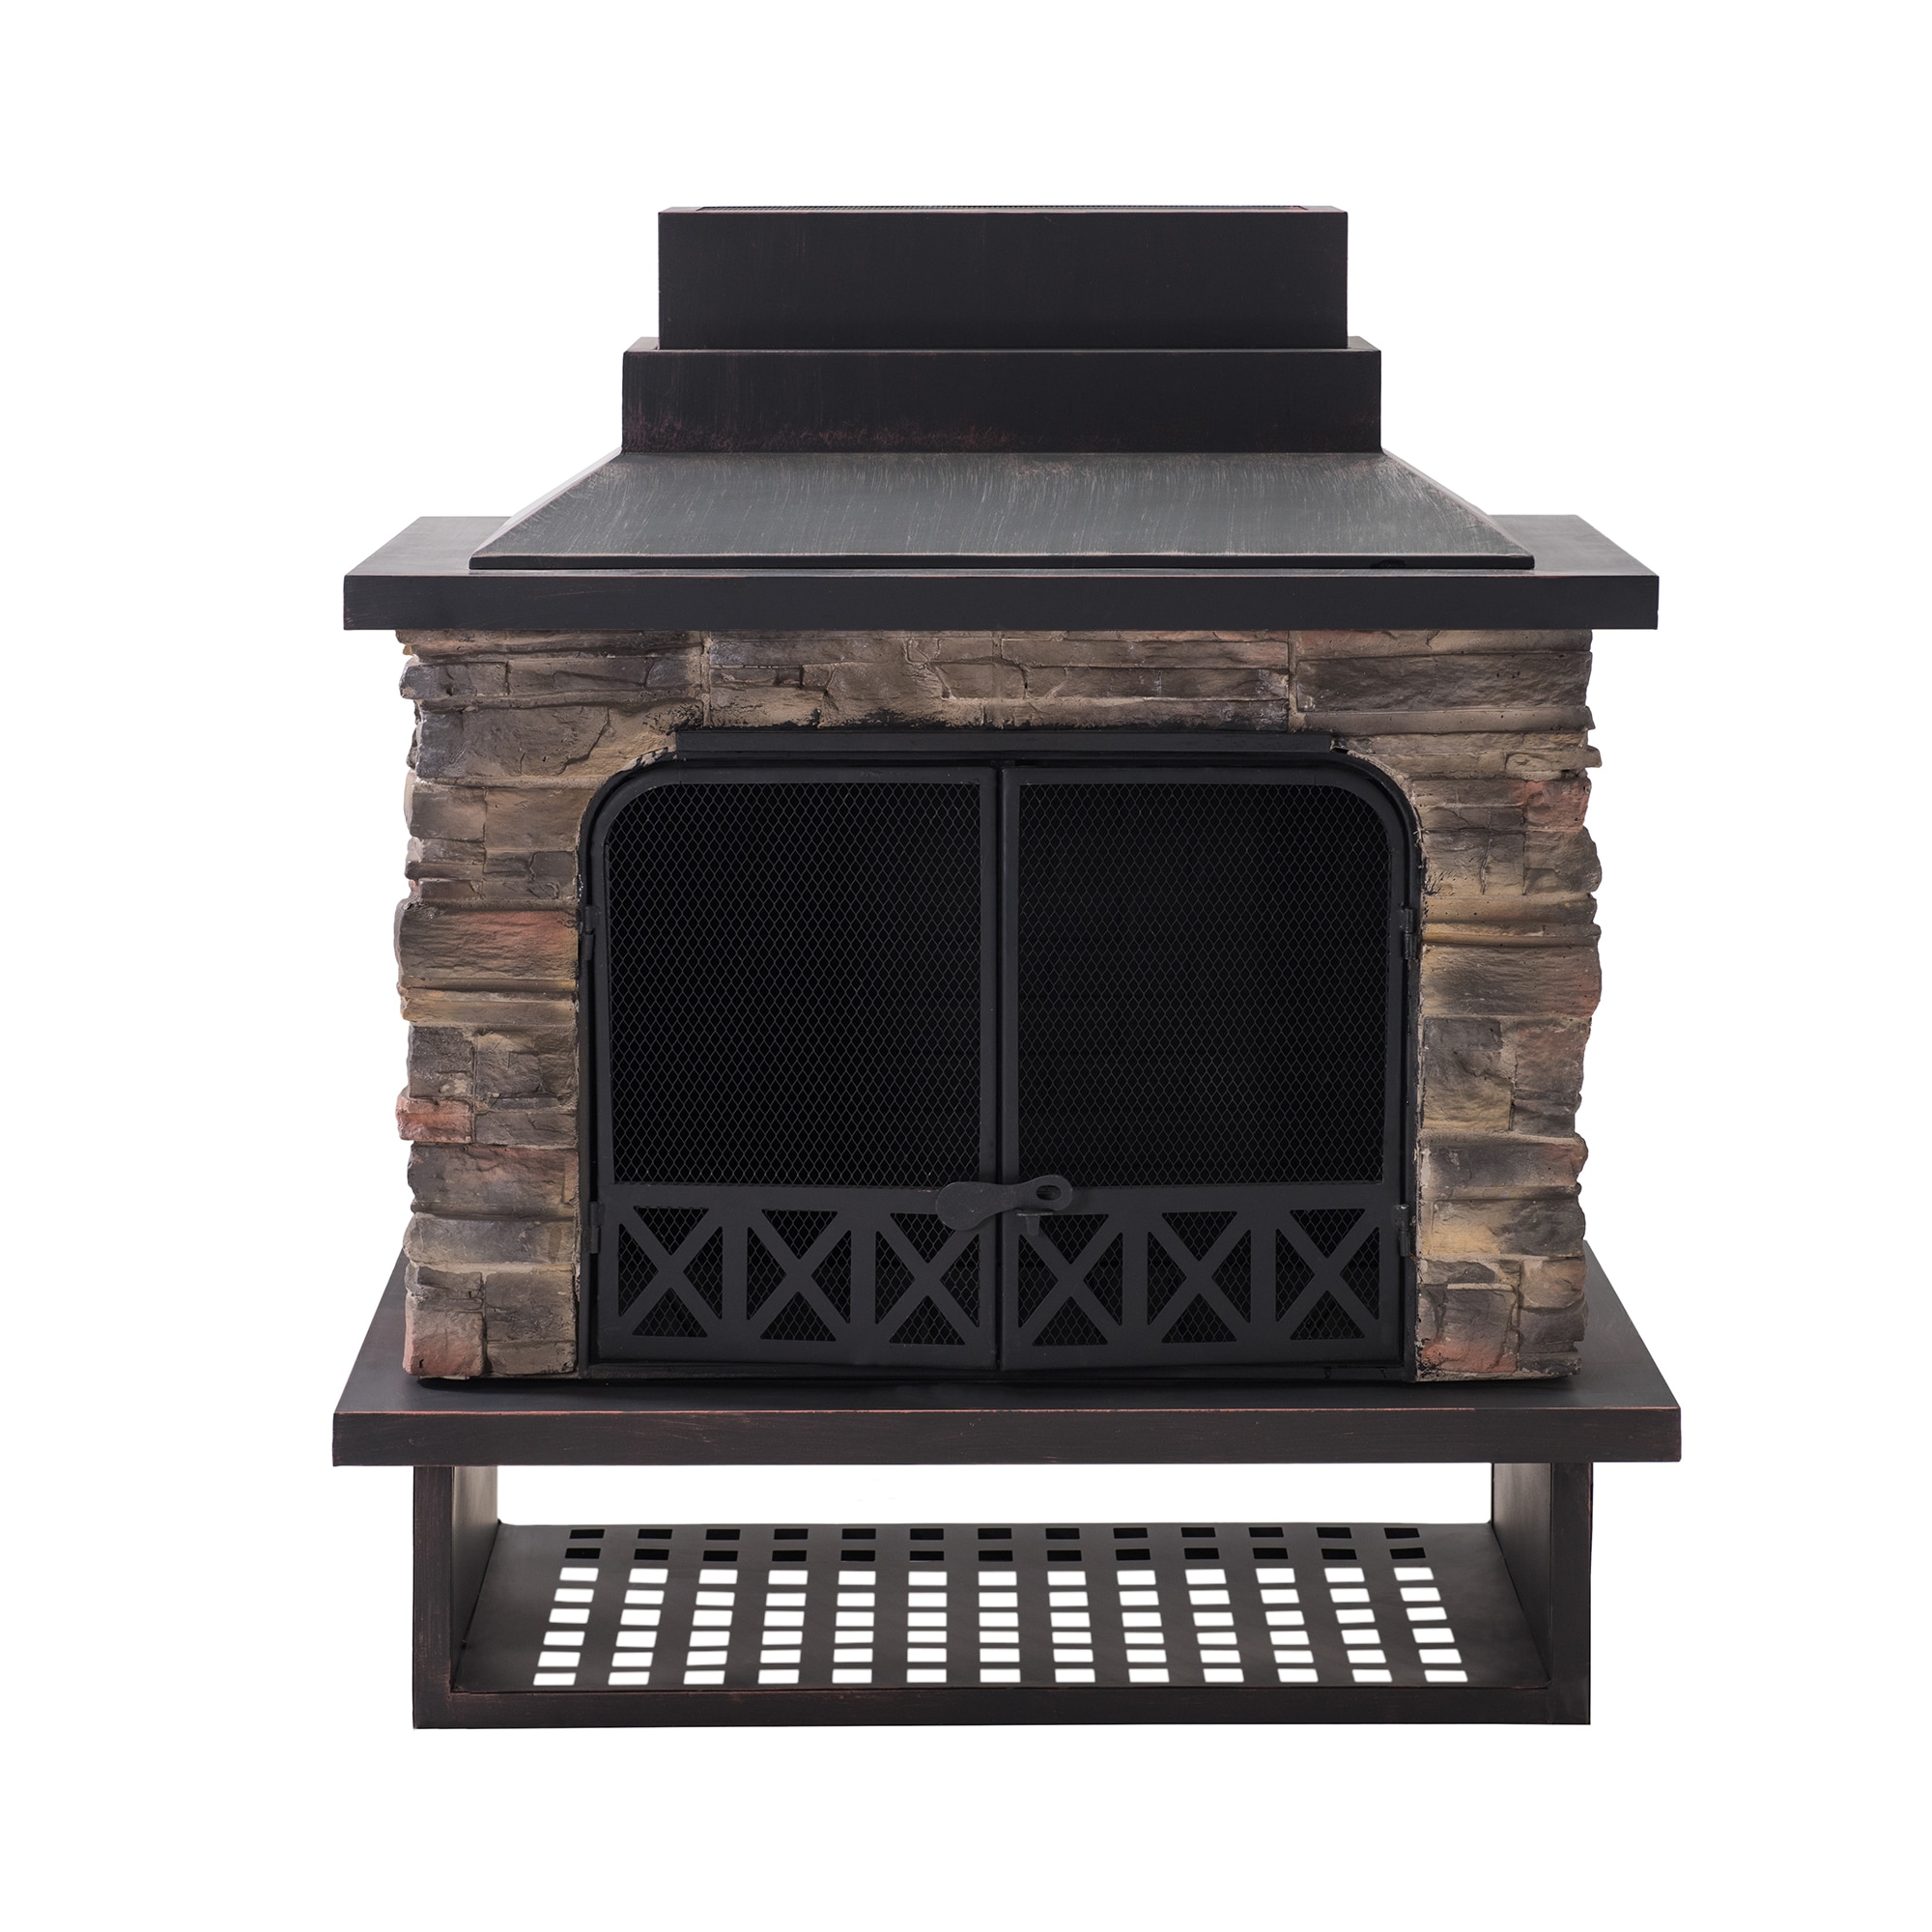 Steel Outdoor Wood Burning Fireplace, Sunjoy Fire Pit Replacement Parts